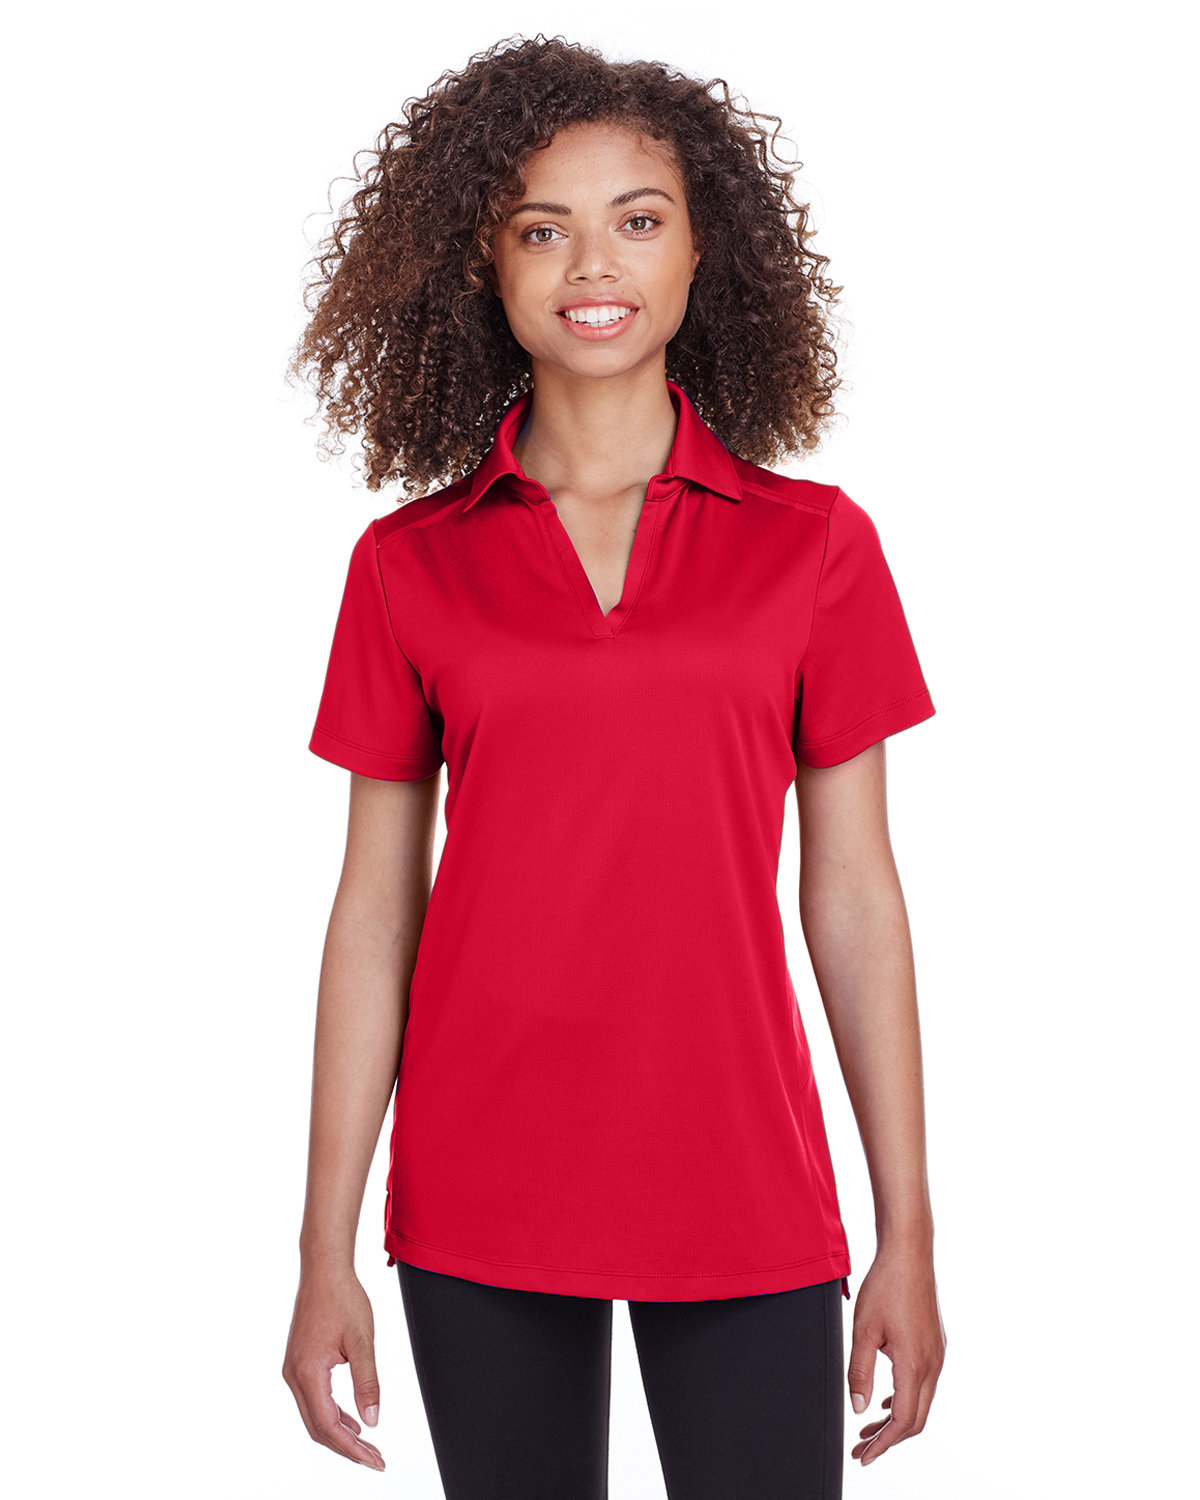 Spyder Ladies' Freestyle Polo RED 